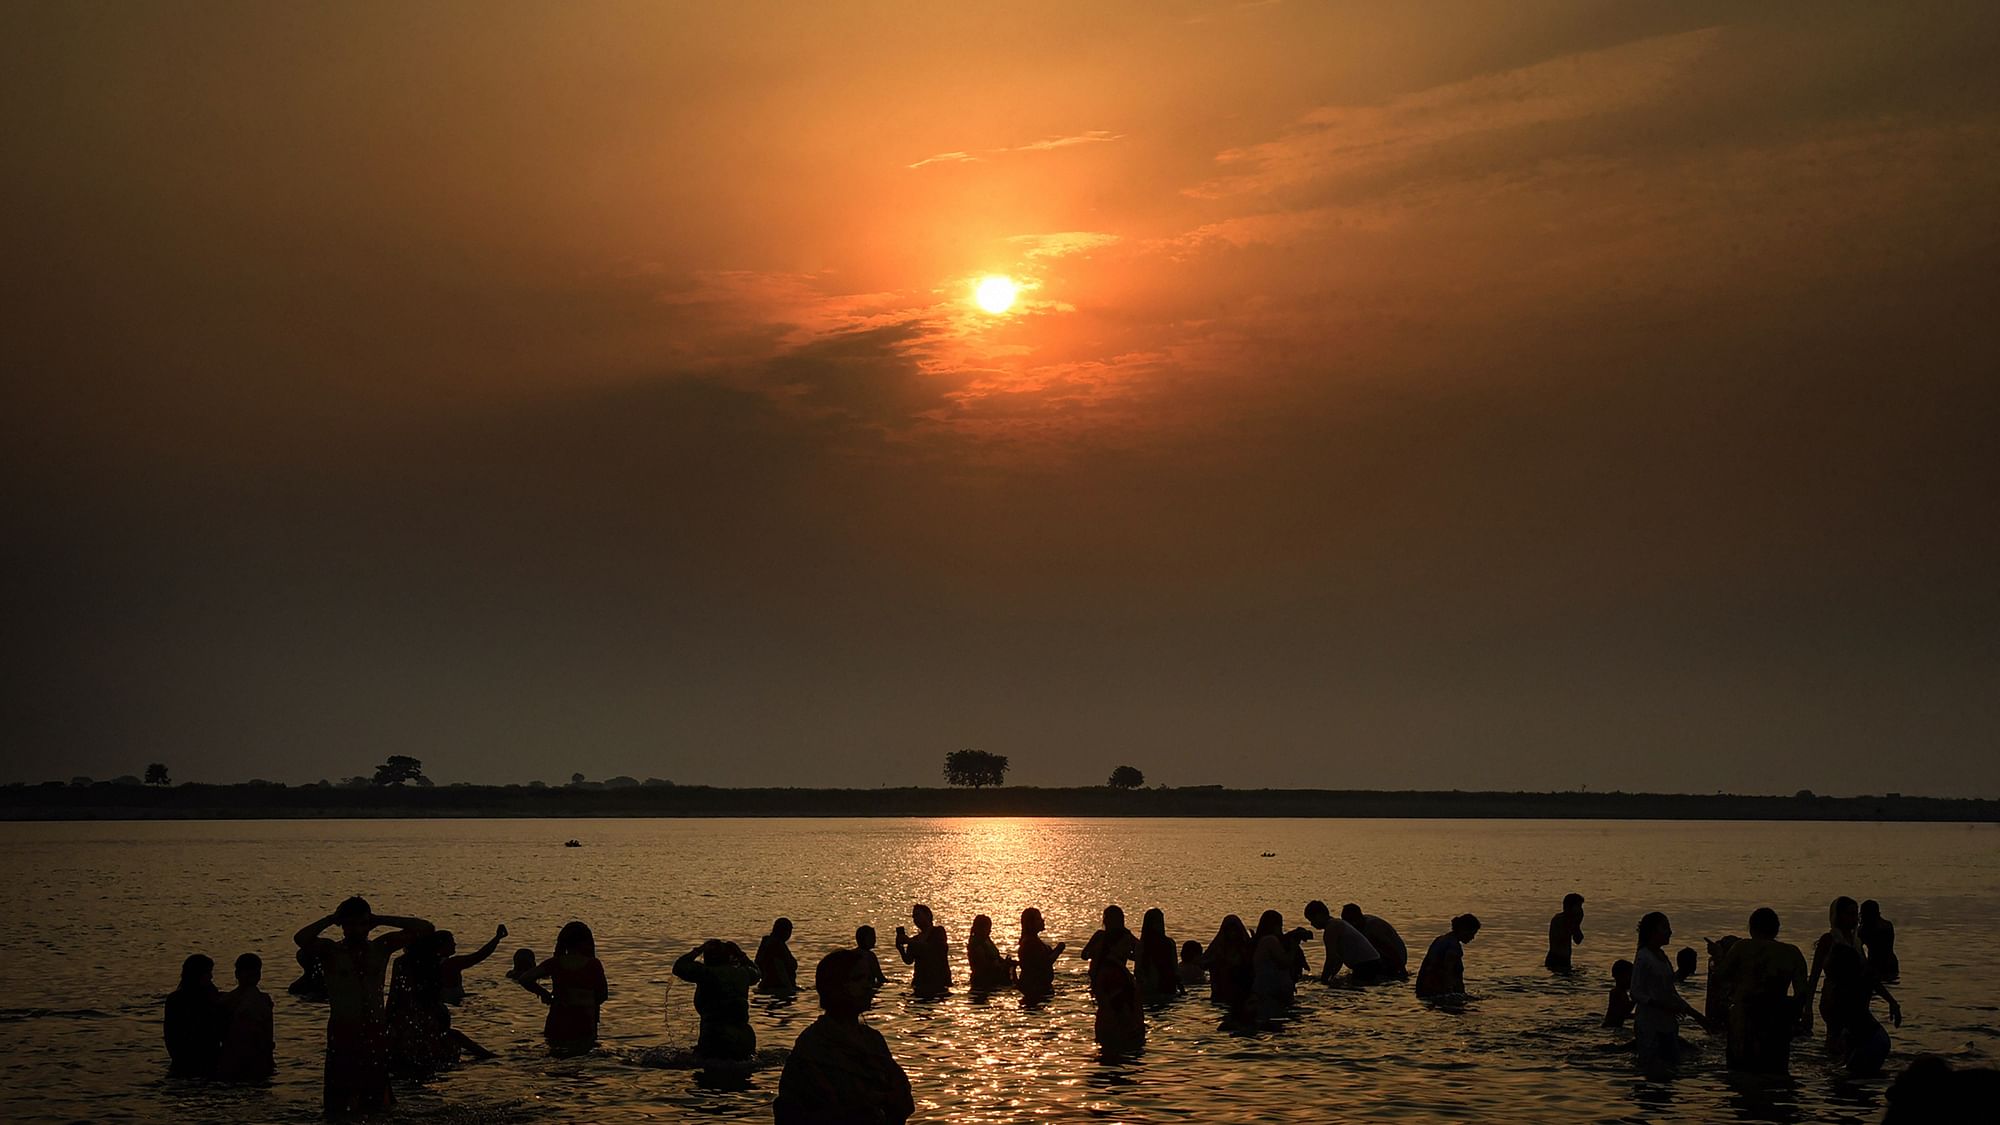 Devotees pray and take bath in the Ganga River on the occasion of Ganga Dussehra, in Patna, on Monday, 1 June 2020.